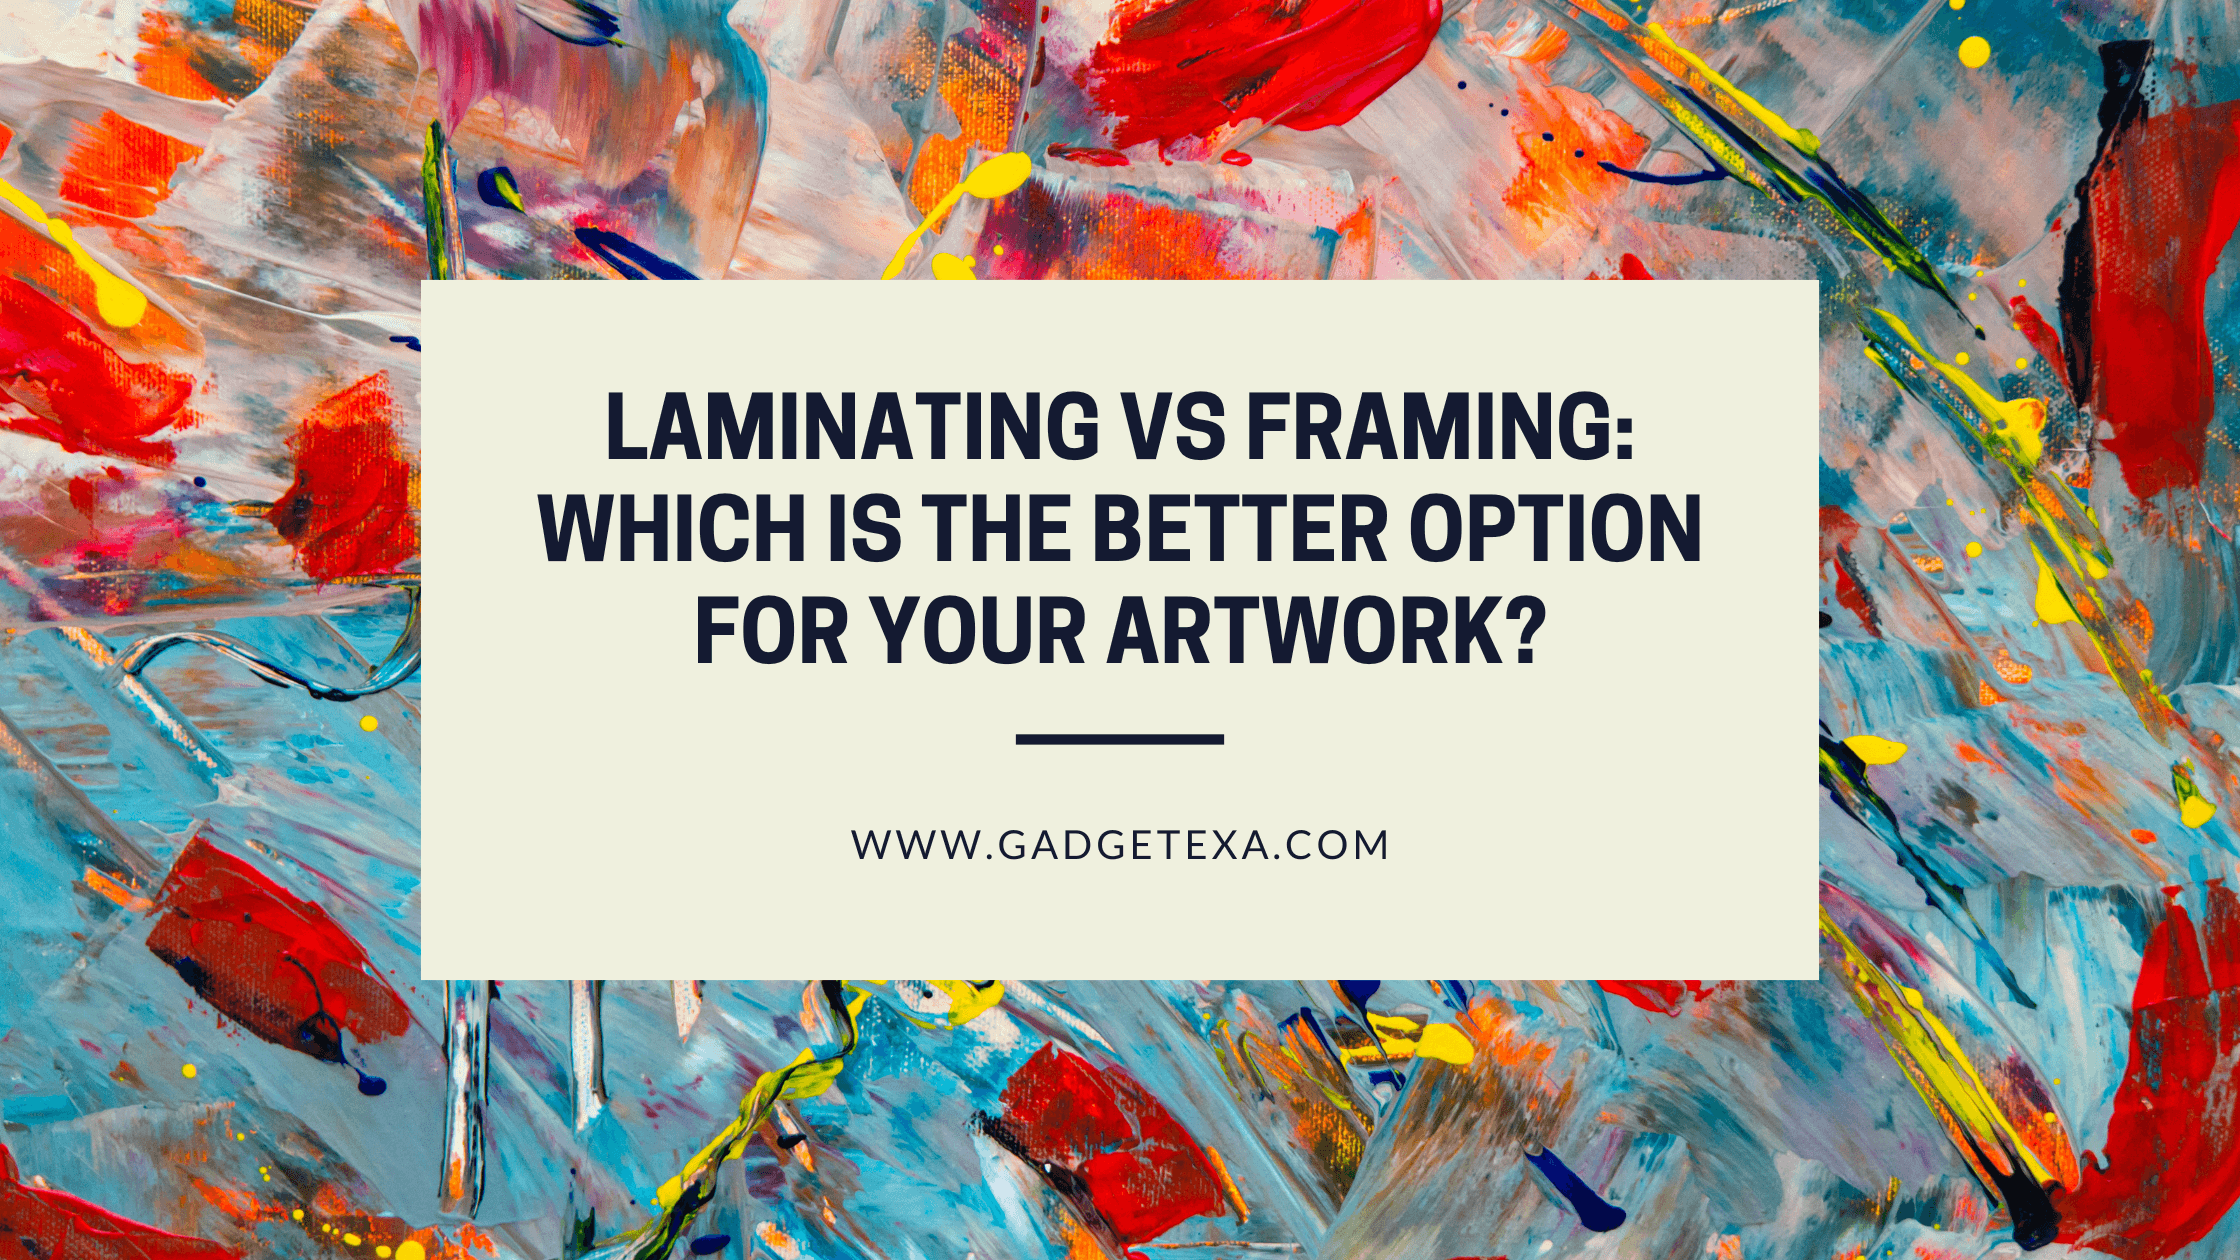 You are currently viewing Laminating vs Framing: Which is the Better Option for Your Artwork?